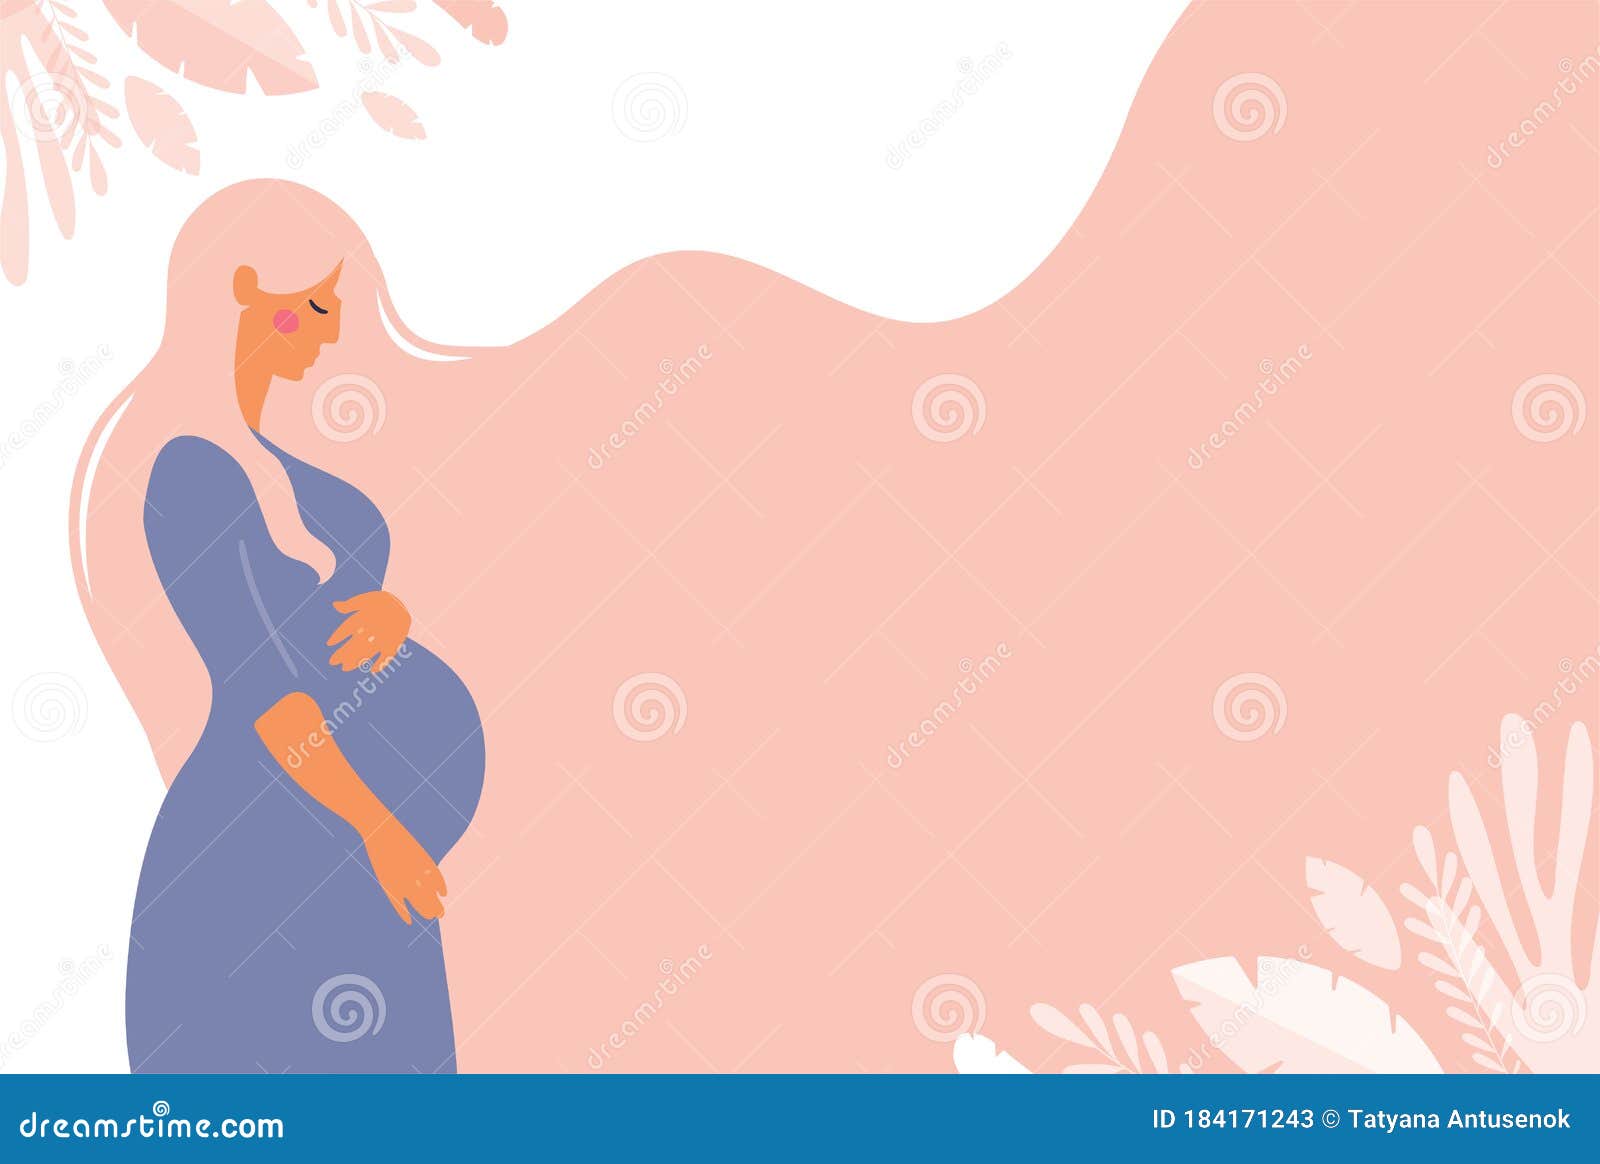 modern banner about pregnancy and motherhood. poster with a cute pregnant woman with long hair and place for text